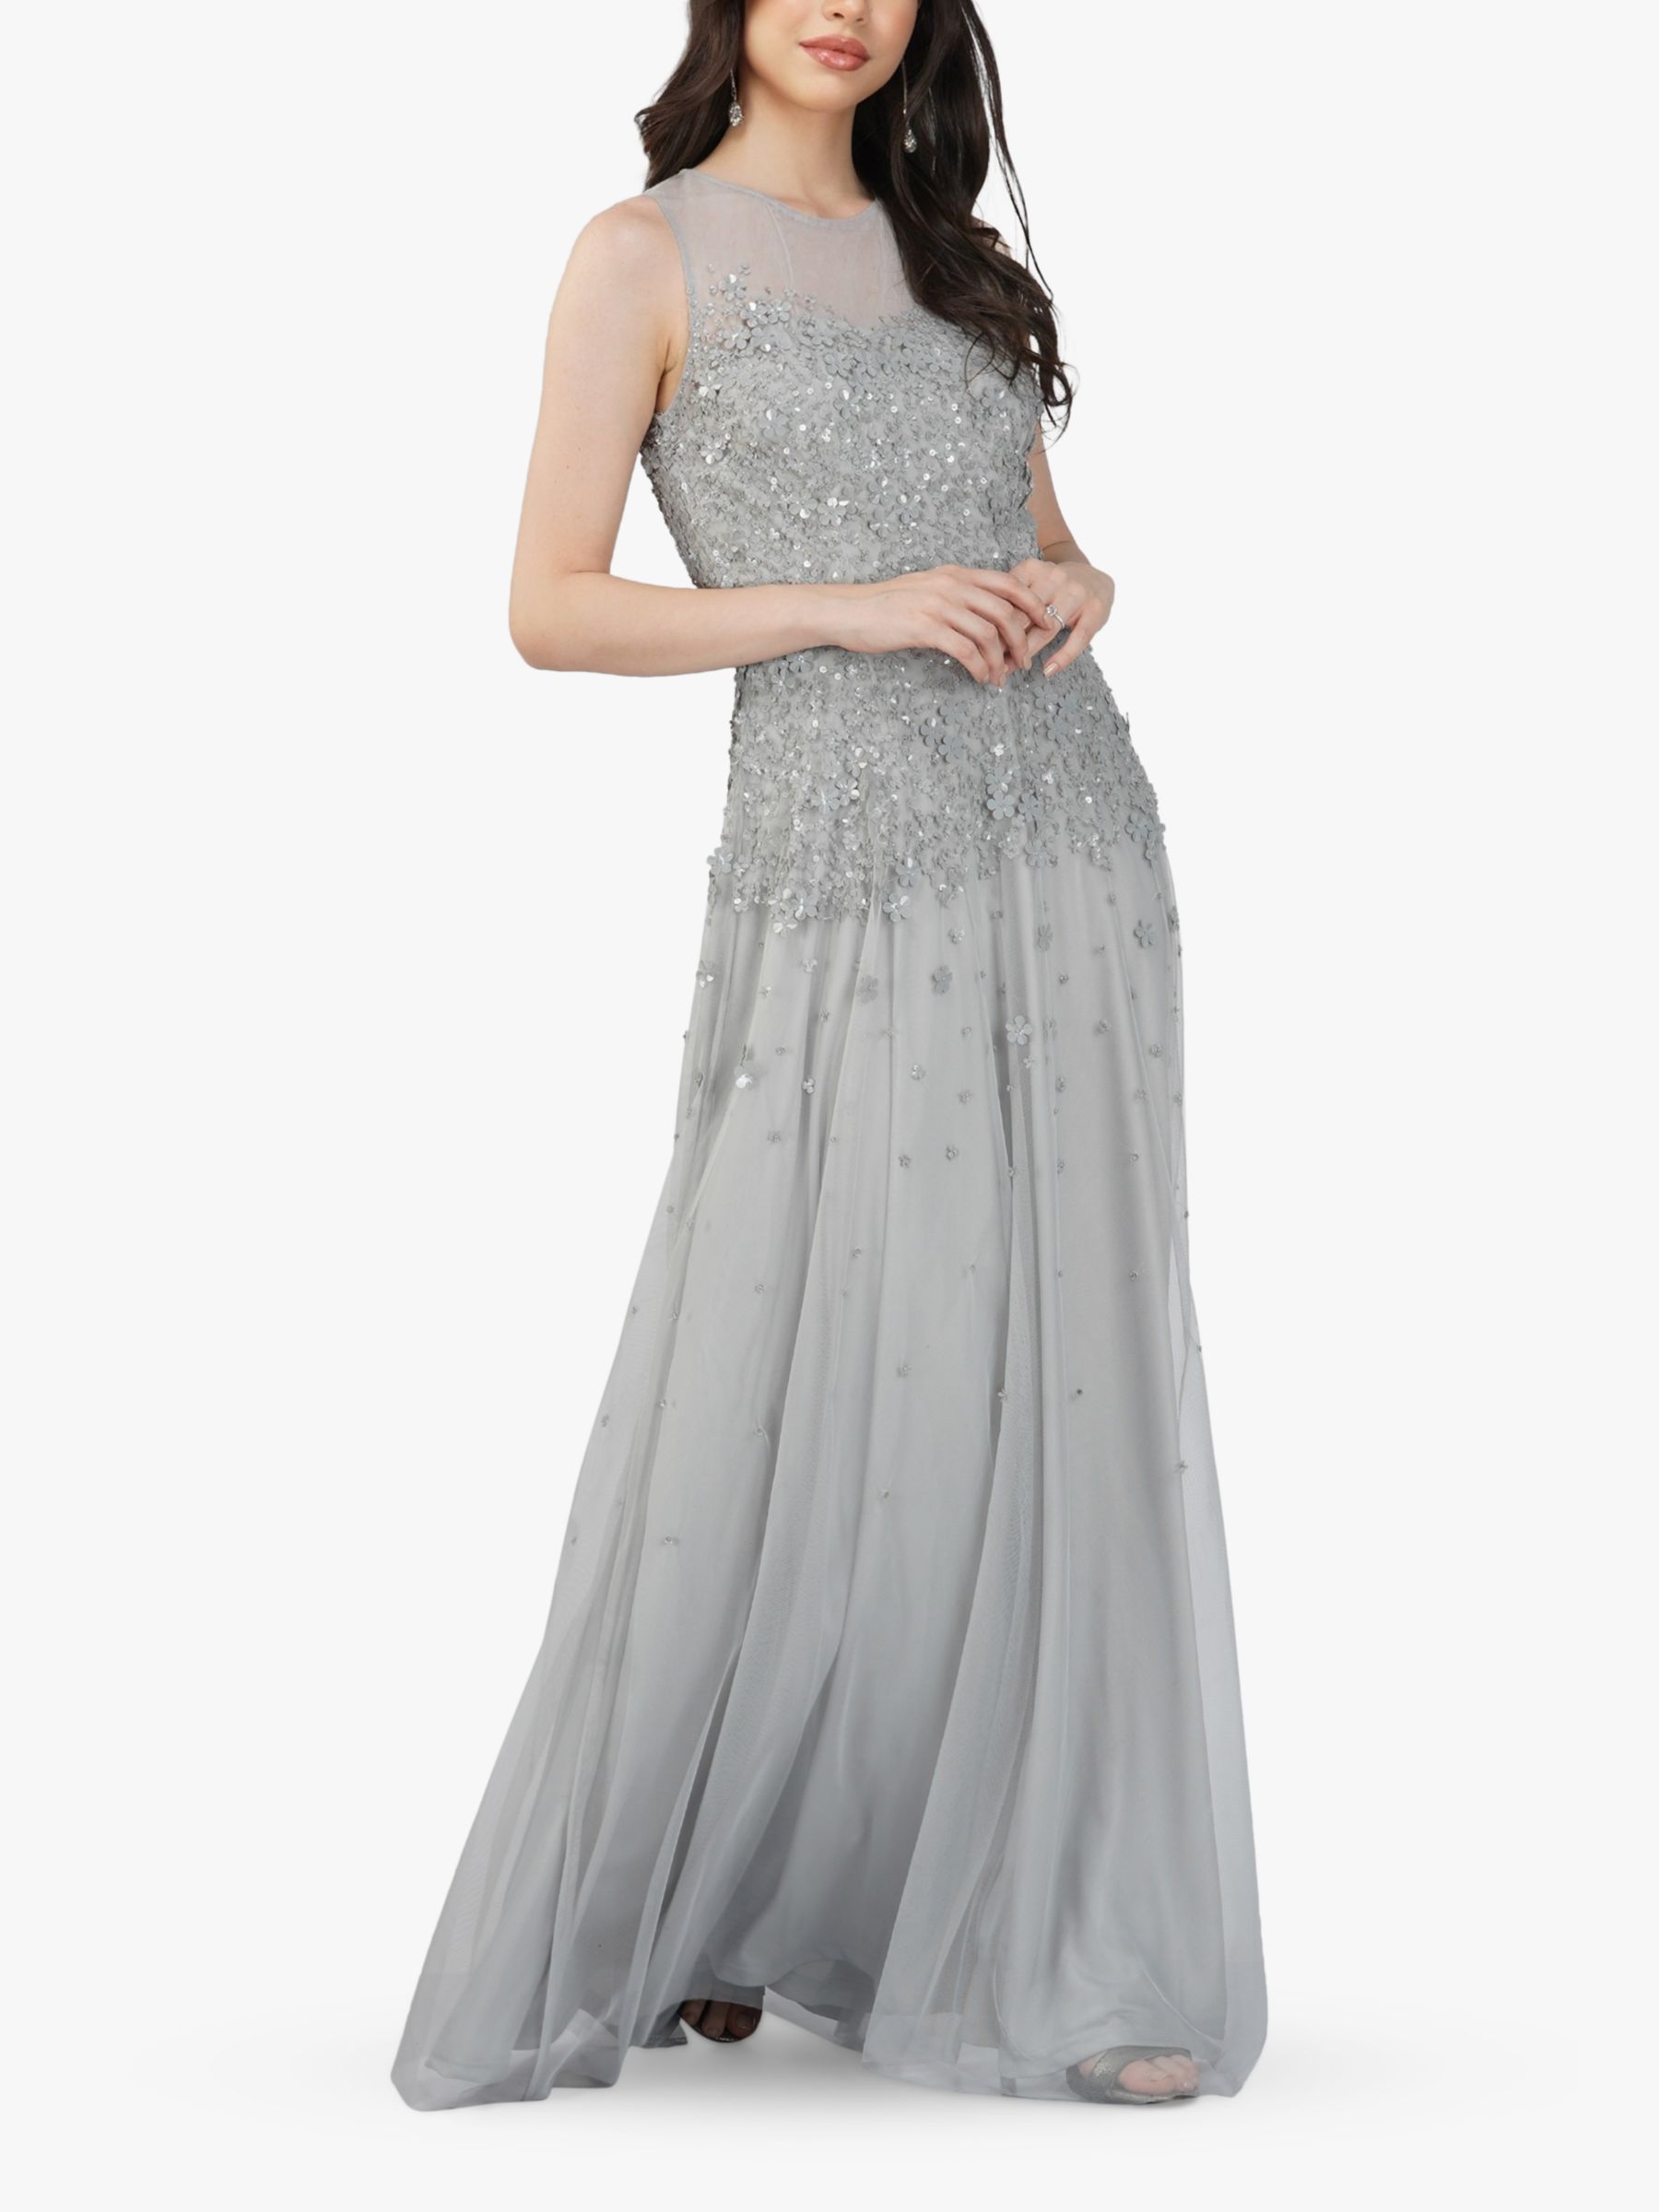 Buy Lace & Beads Lilith Floral Embellished Maxi Dress Online at johnlewis.com